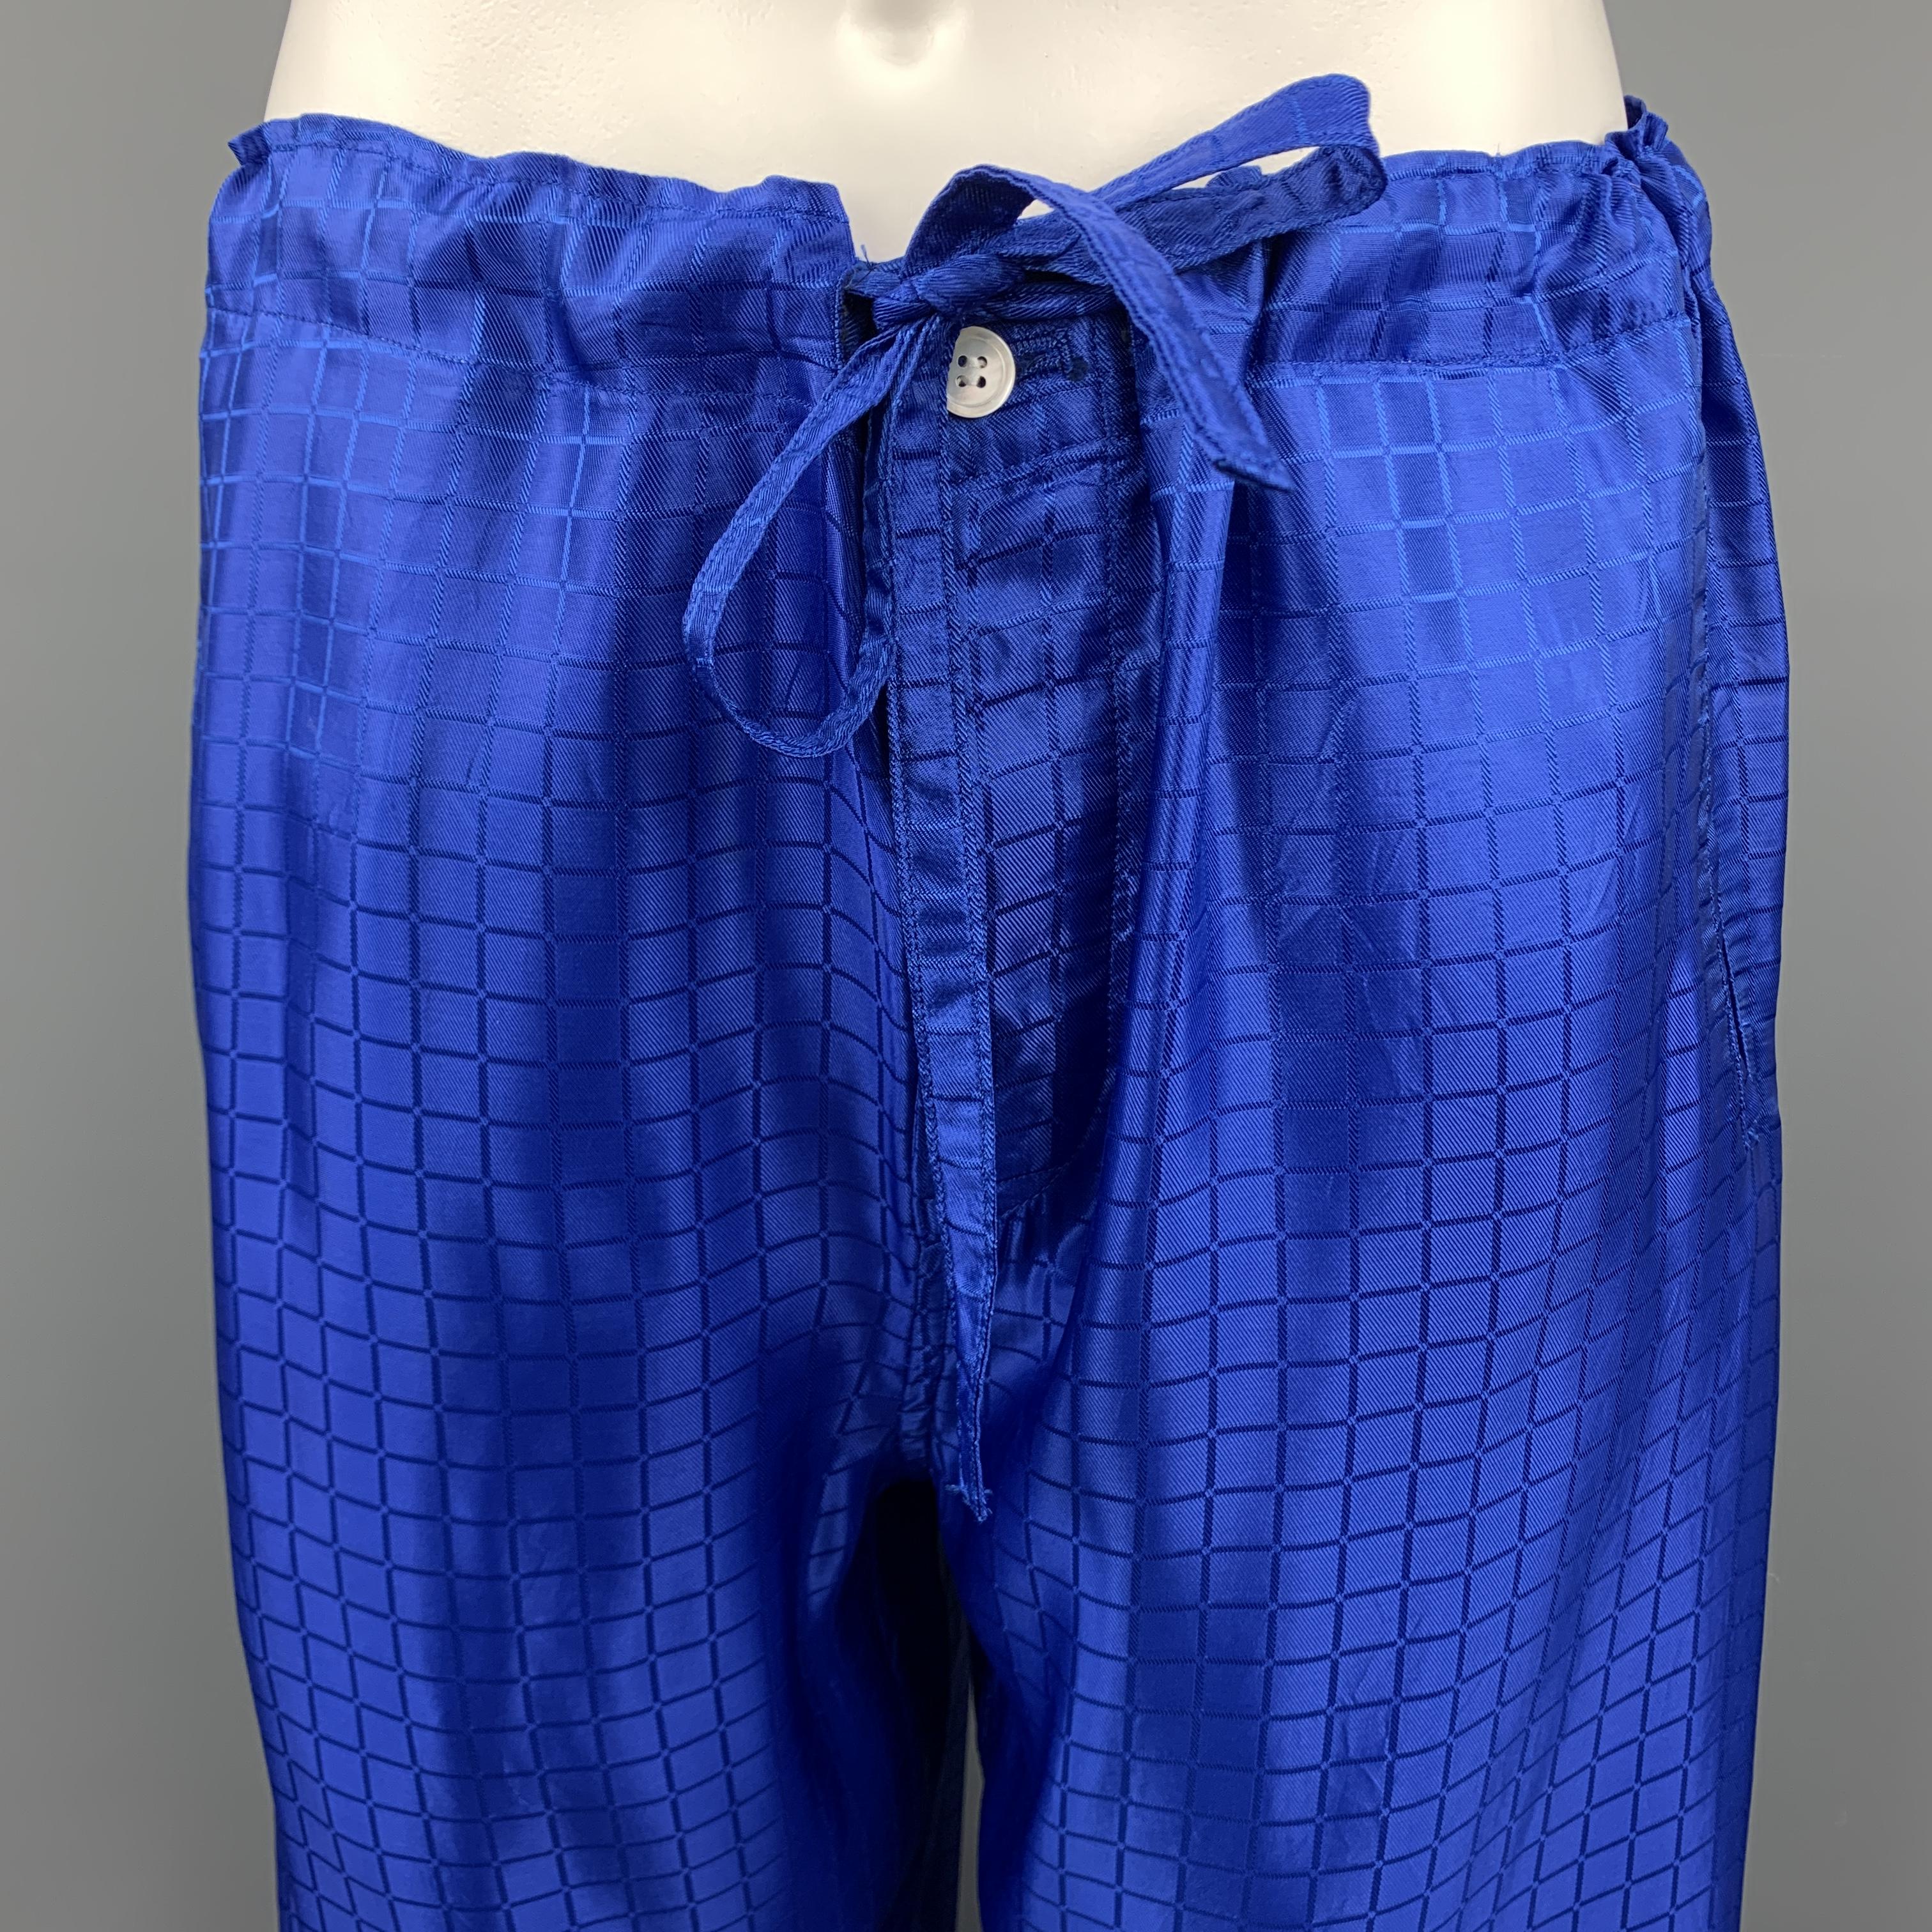 COMME des GARCONS HOMME PLUS Casual pants comes in a window pane blue C pattern acetate / rayon material, featuring a drawstring, slit pockets, wide legs, button fly. Made in Japan.

Excellent Pre-Owned Condition.
Marked: S

Measurements:

Waist: 42